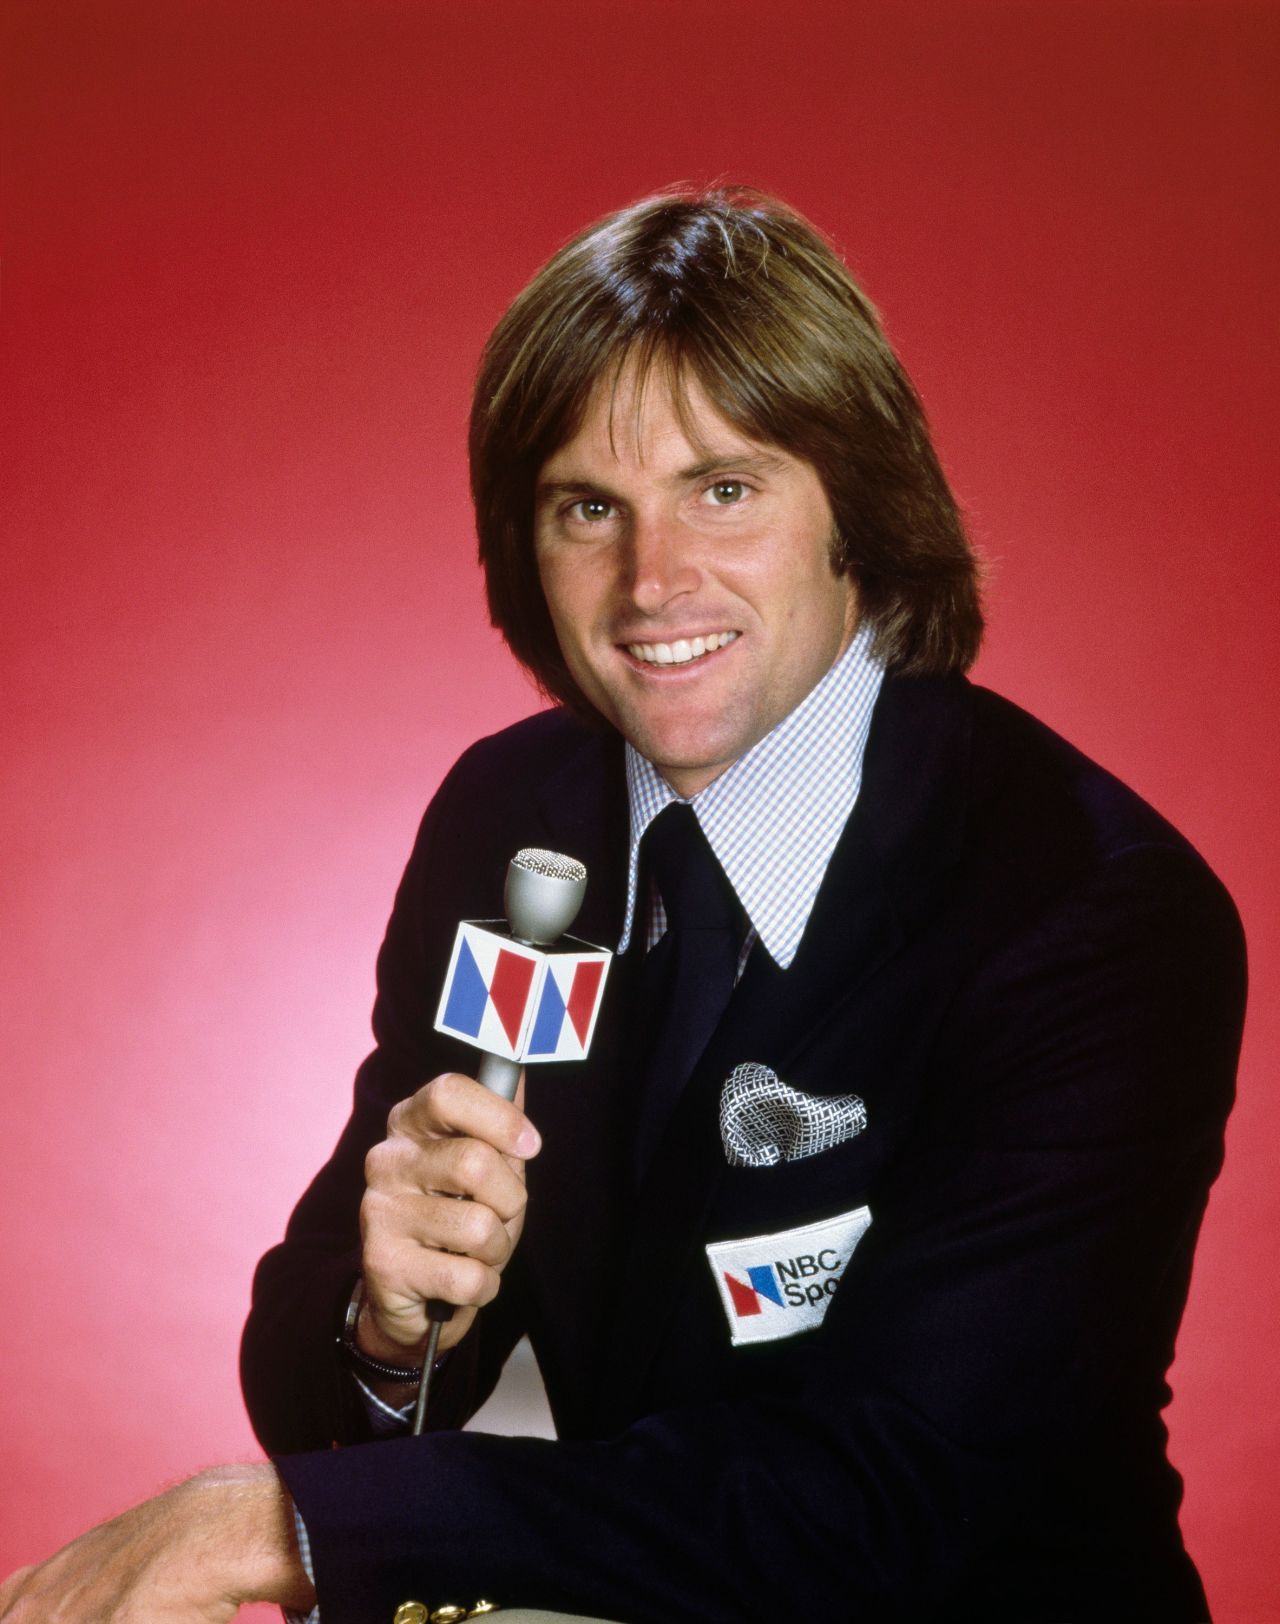 Jenner served as an NBC sportscaster for several years.